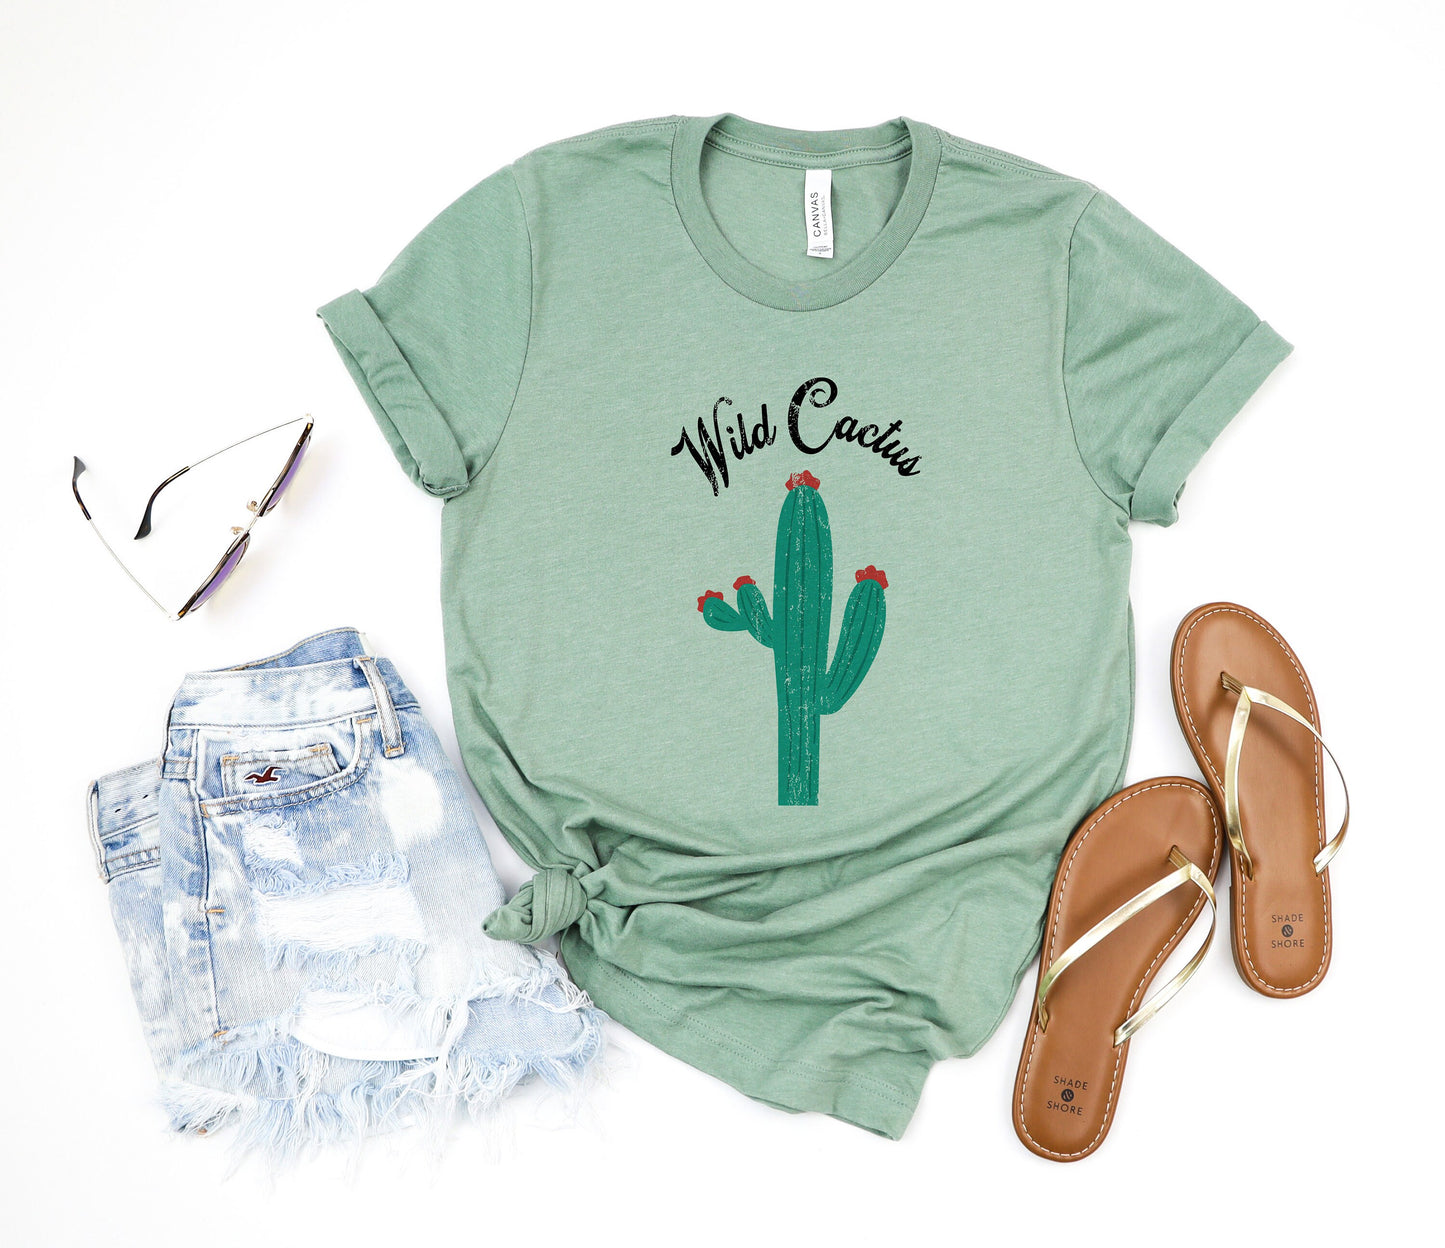 Wild Cactus Vintage Retro Succulent Style Ultra Soft Graphic Tee Unisex Soft Tee T-shirt for Women or Men